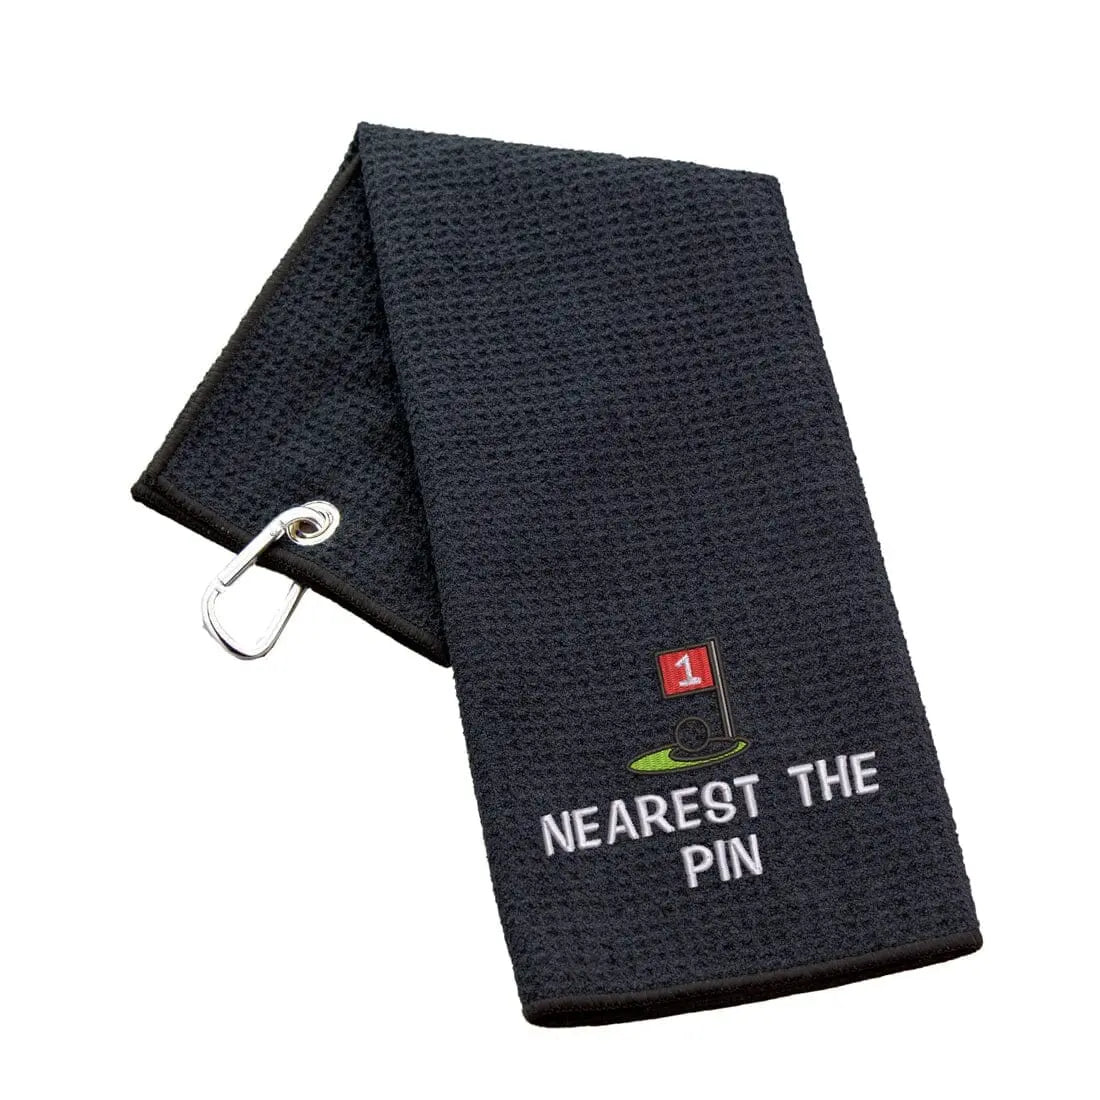 Tri-Fold Golf Towel Embroidered For Nearest The Pin Competition - Duncan Stewart 1978 Waffle-Black Duncan Stewart 1978